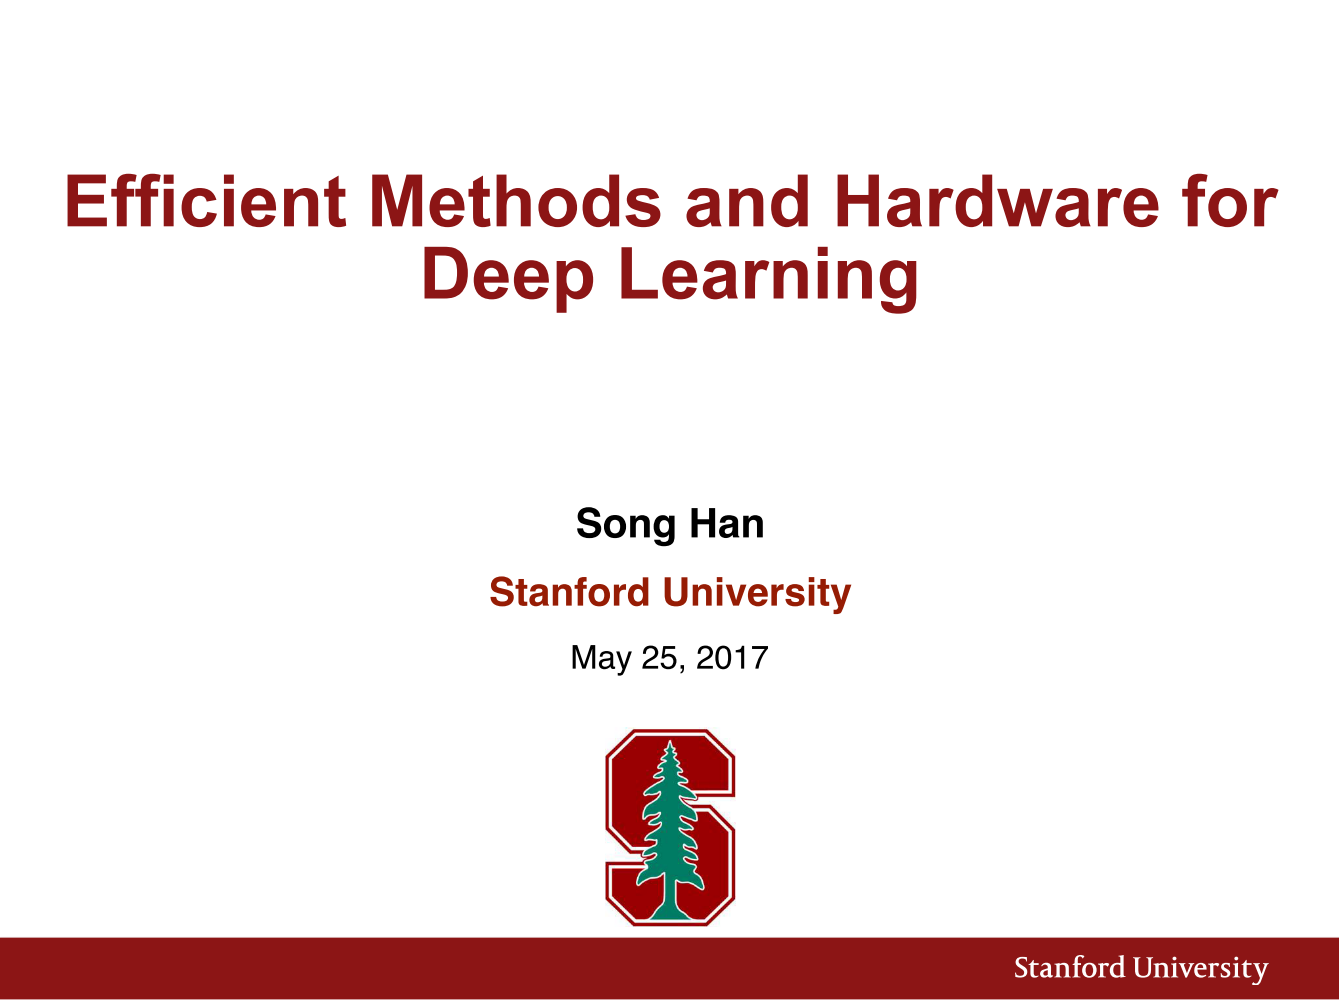 15. Efficient Methods and Hardware for Deep Learning